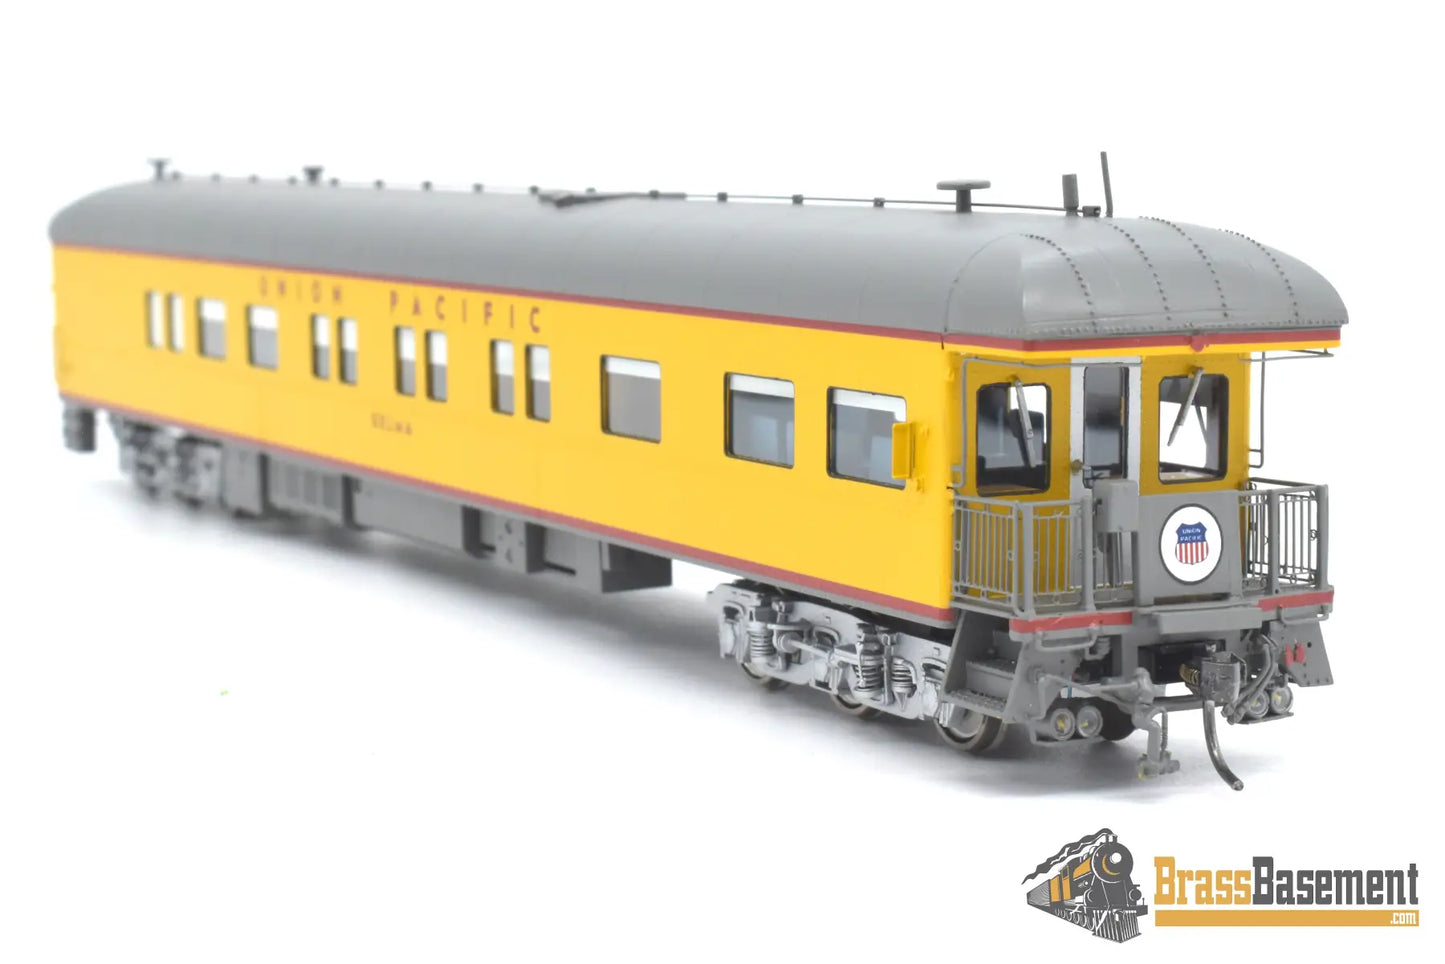 Ho Brass - North Bank Line Nbl Up Union Pacific ’Selma’ 1987 - Mid 90S Version Brand New Passenger